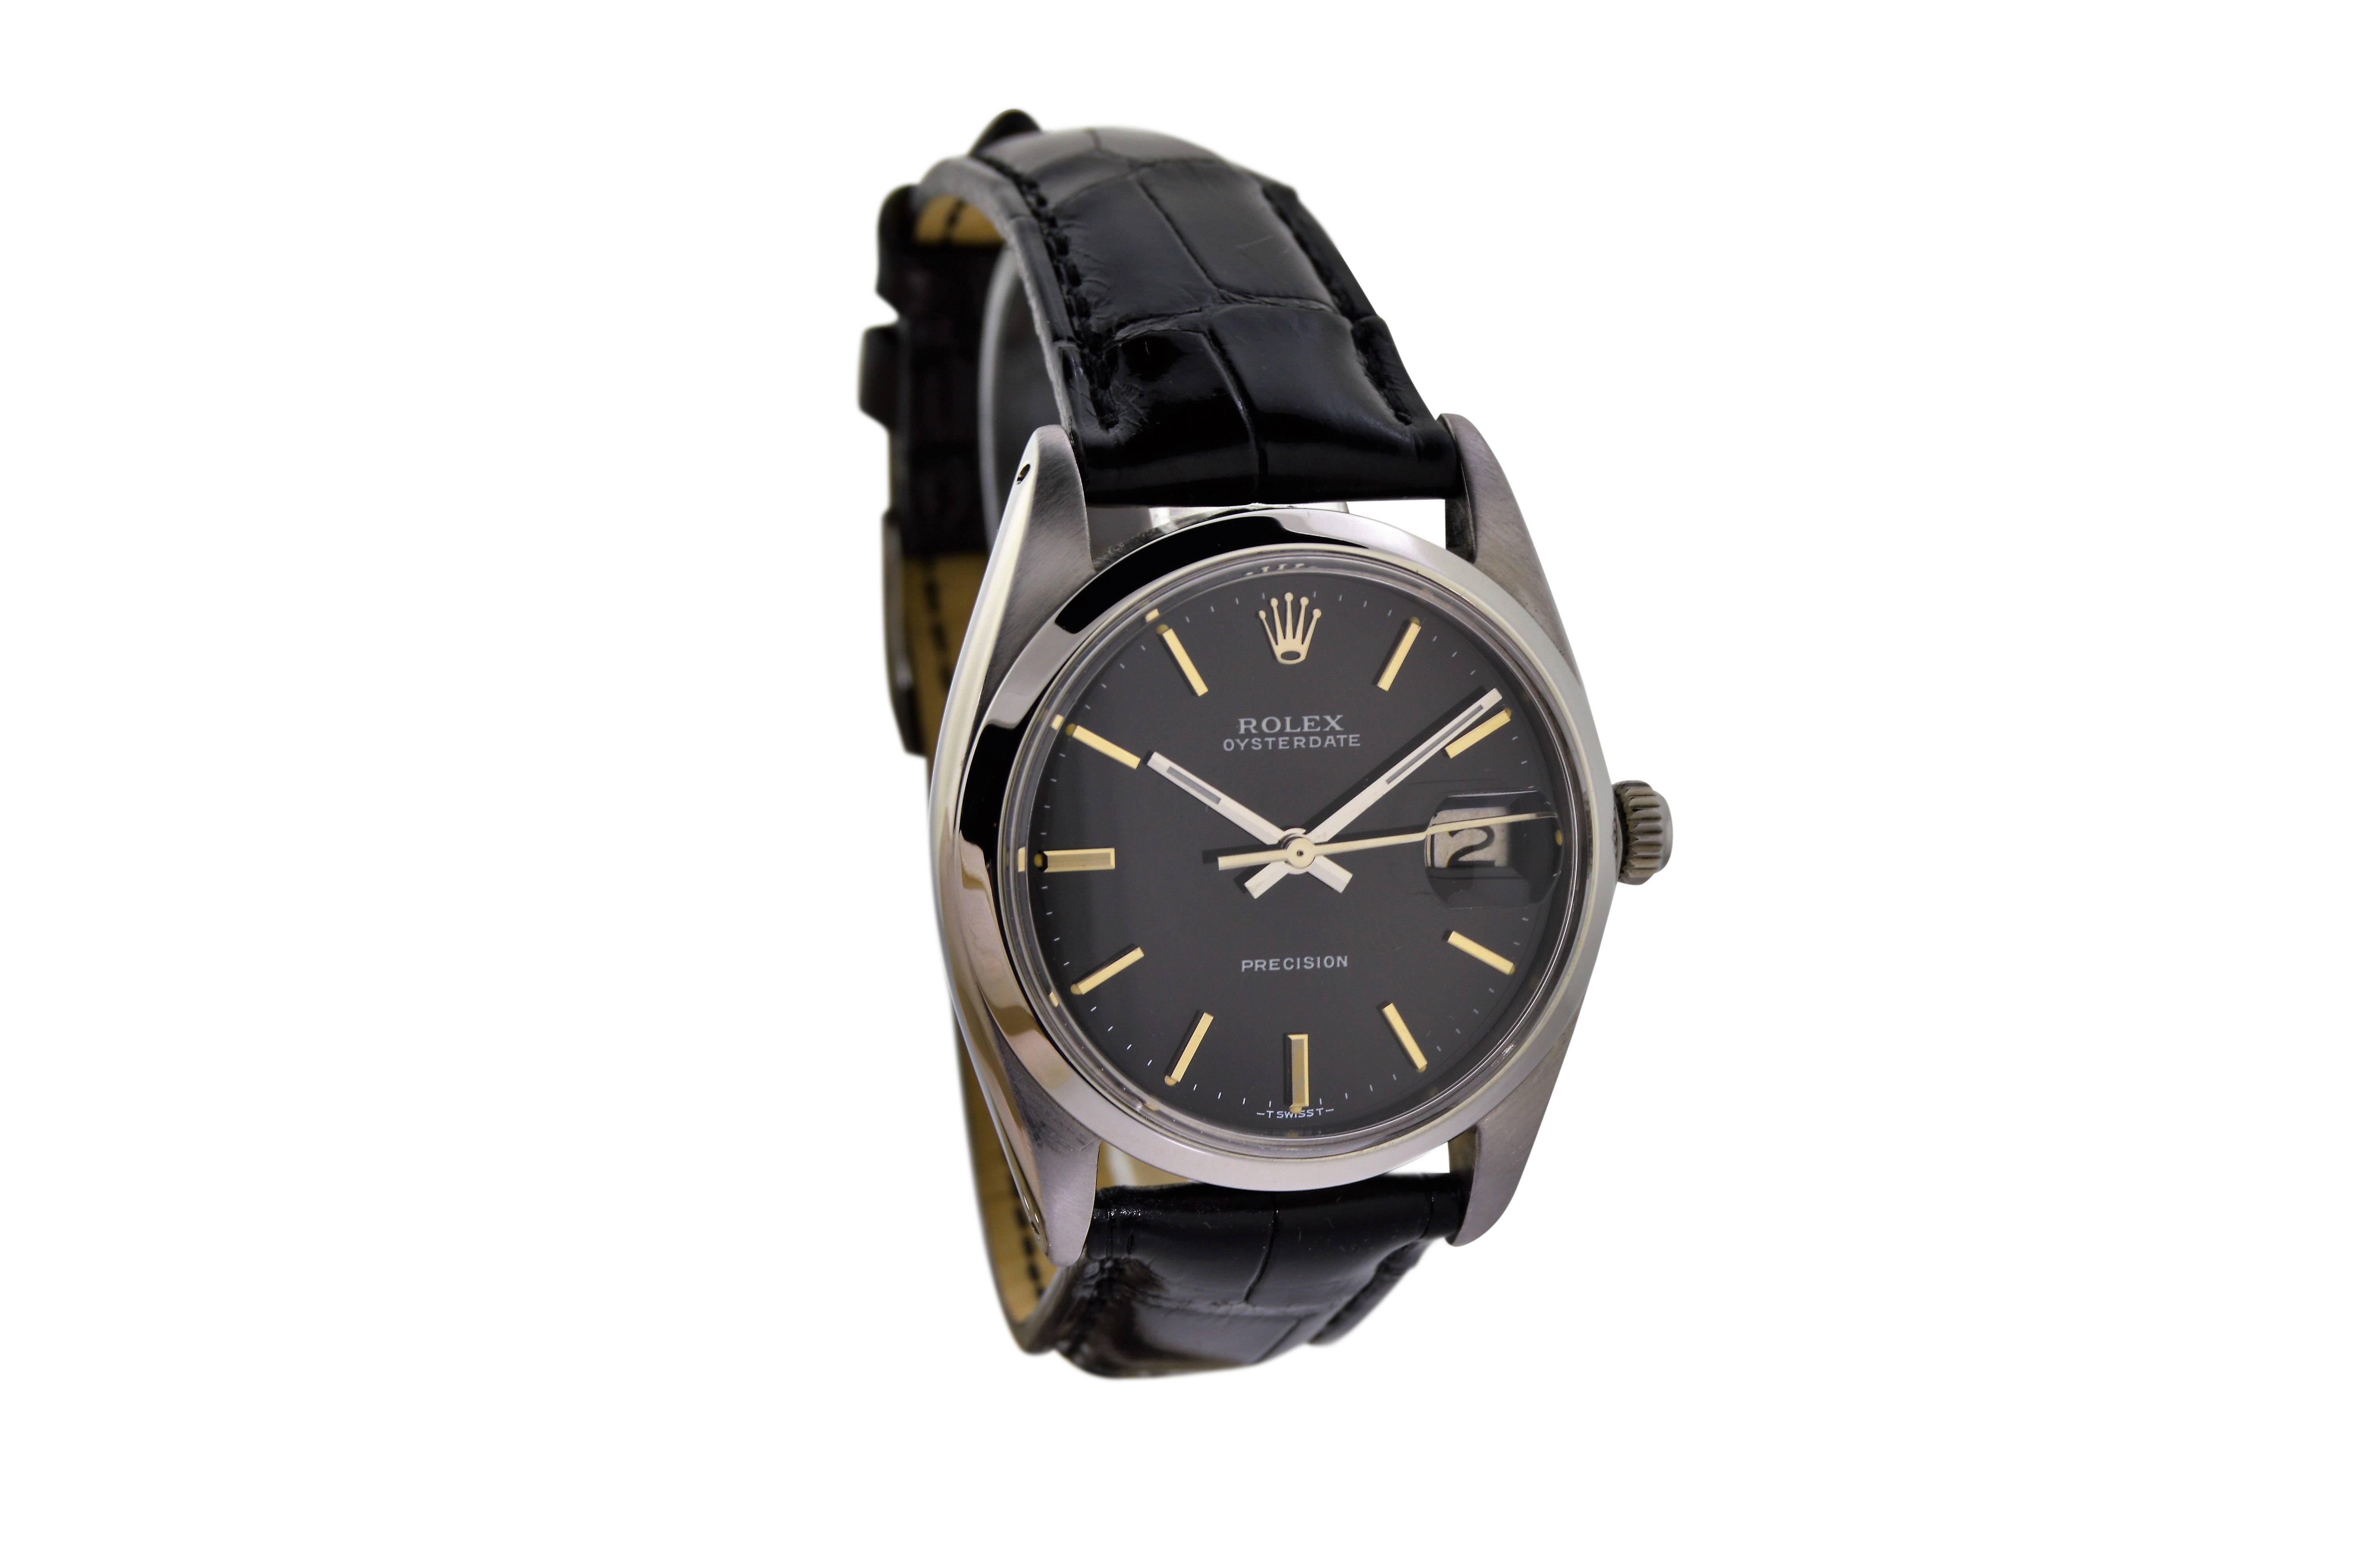 FACTORY / HOUSE: Rolex Watch Company
STYLE / REFERENCE: Oysterdate / 6694Wristwatch
METAL / MATERIAL: Stainless Steel
DIMENSIONS:  39mm  X  34mm
CIRCA: 1964/65
MOVEMENT / CALIBER: Manual Winding / 17 Jewels
DIAL / HANDS: Original Black w/ Baton